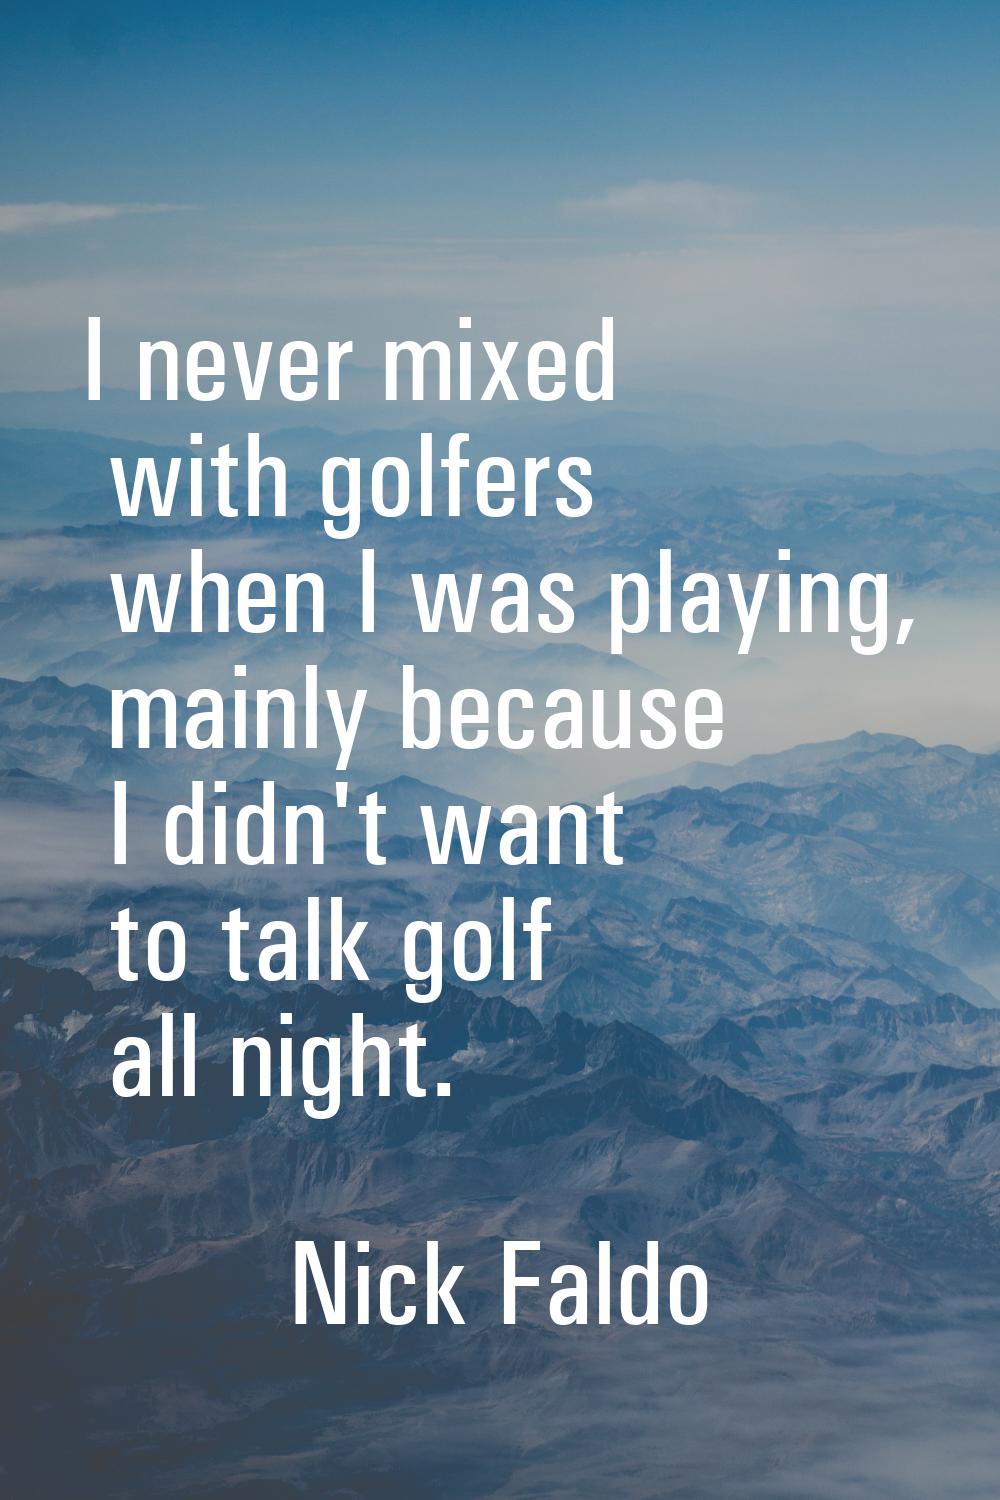 I never mixed with golfers when I was playing, mainly because I didn't want to talk golf all night.